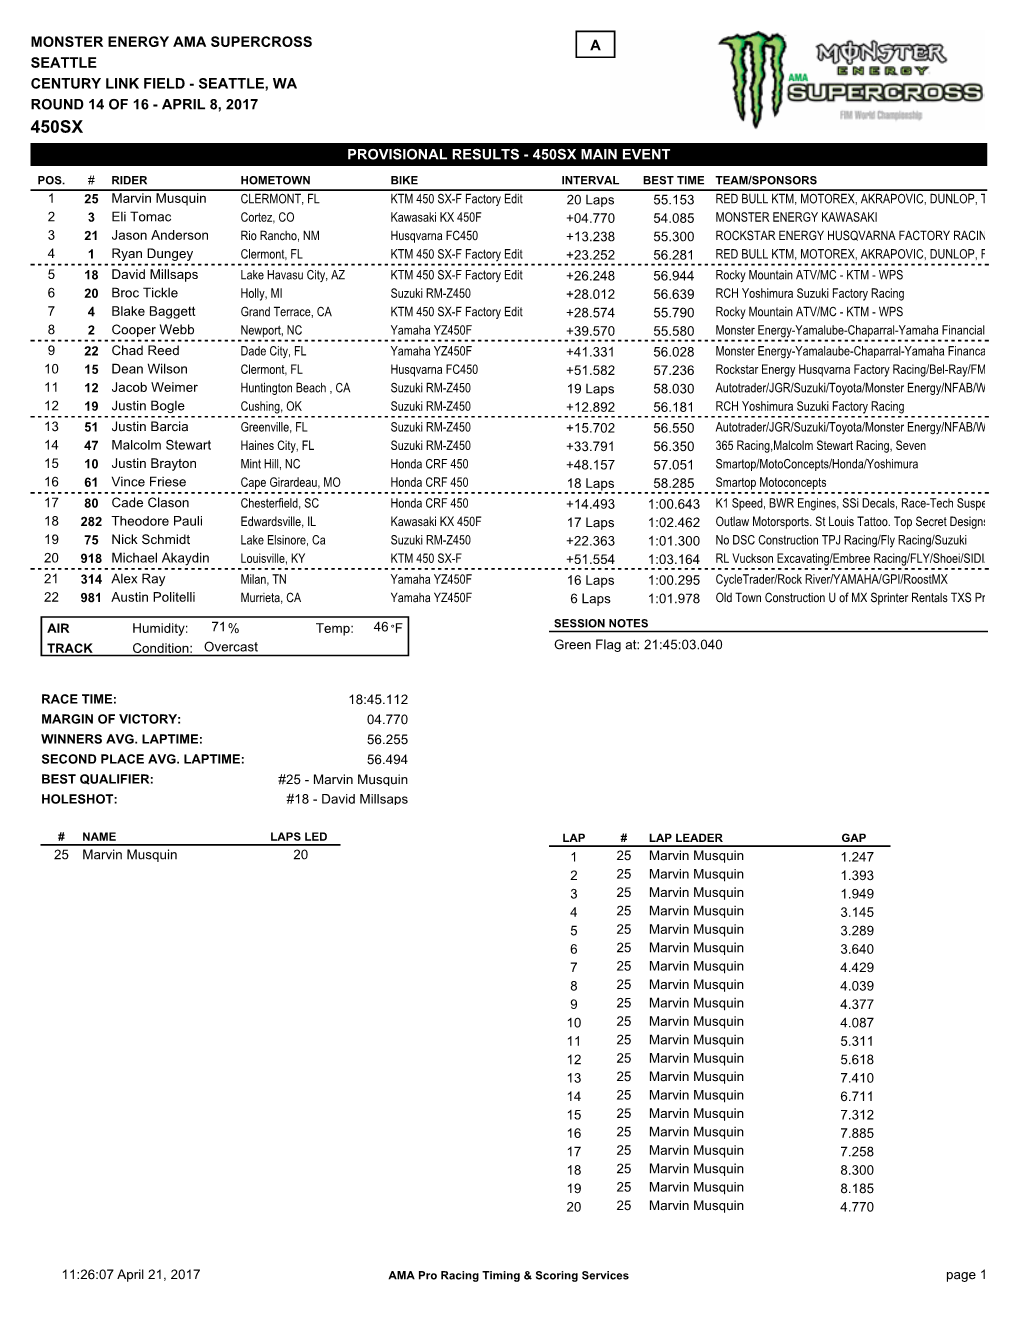 Provisional Results - 450Sx Main Event